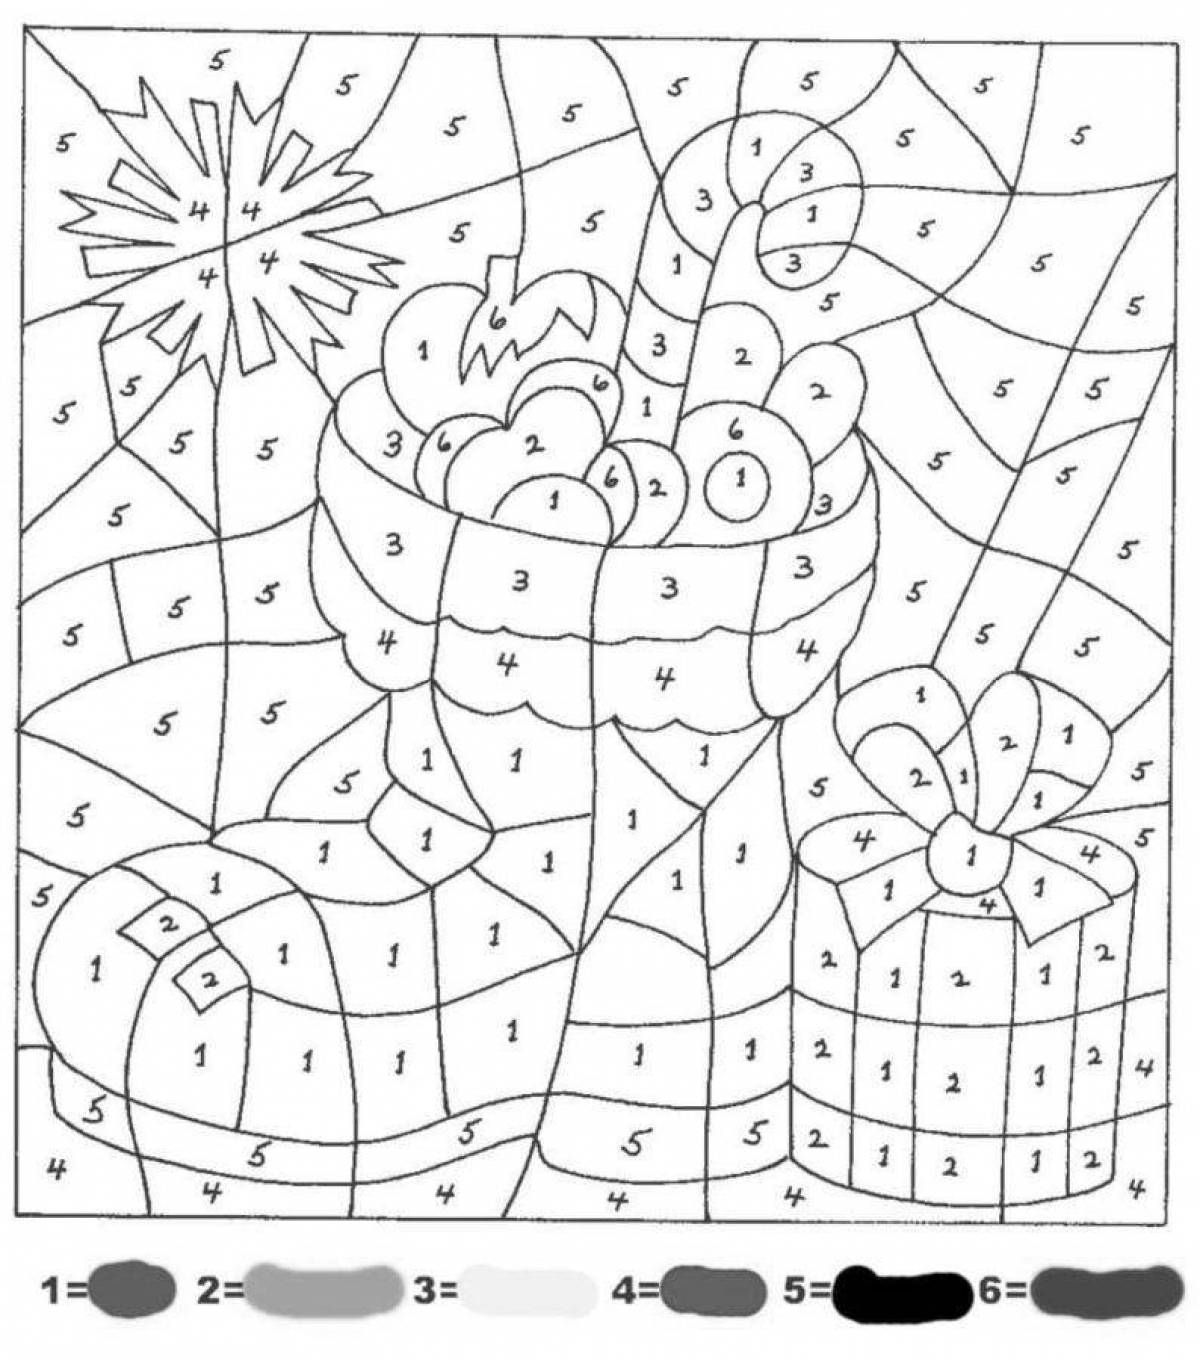 Fabulous new year coloring book in numbers